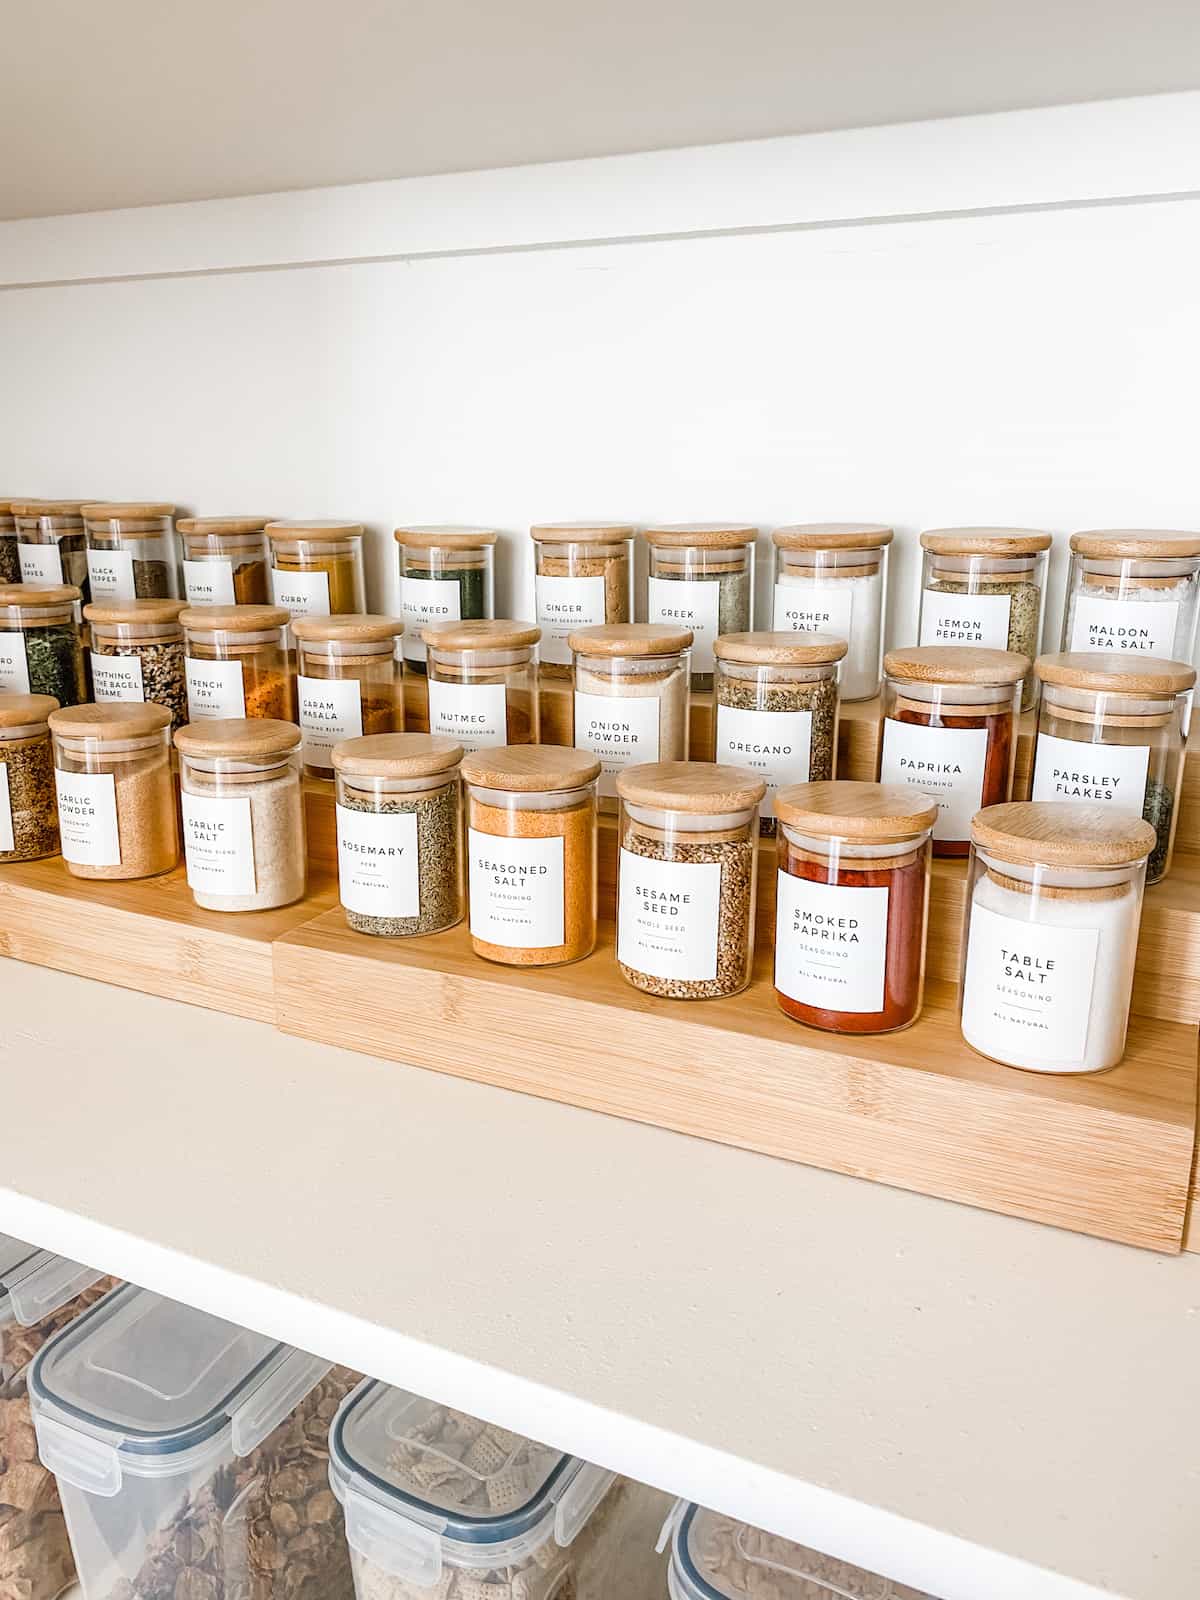 Rows of spices in glass jars on pantry shelf